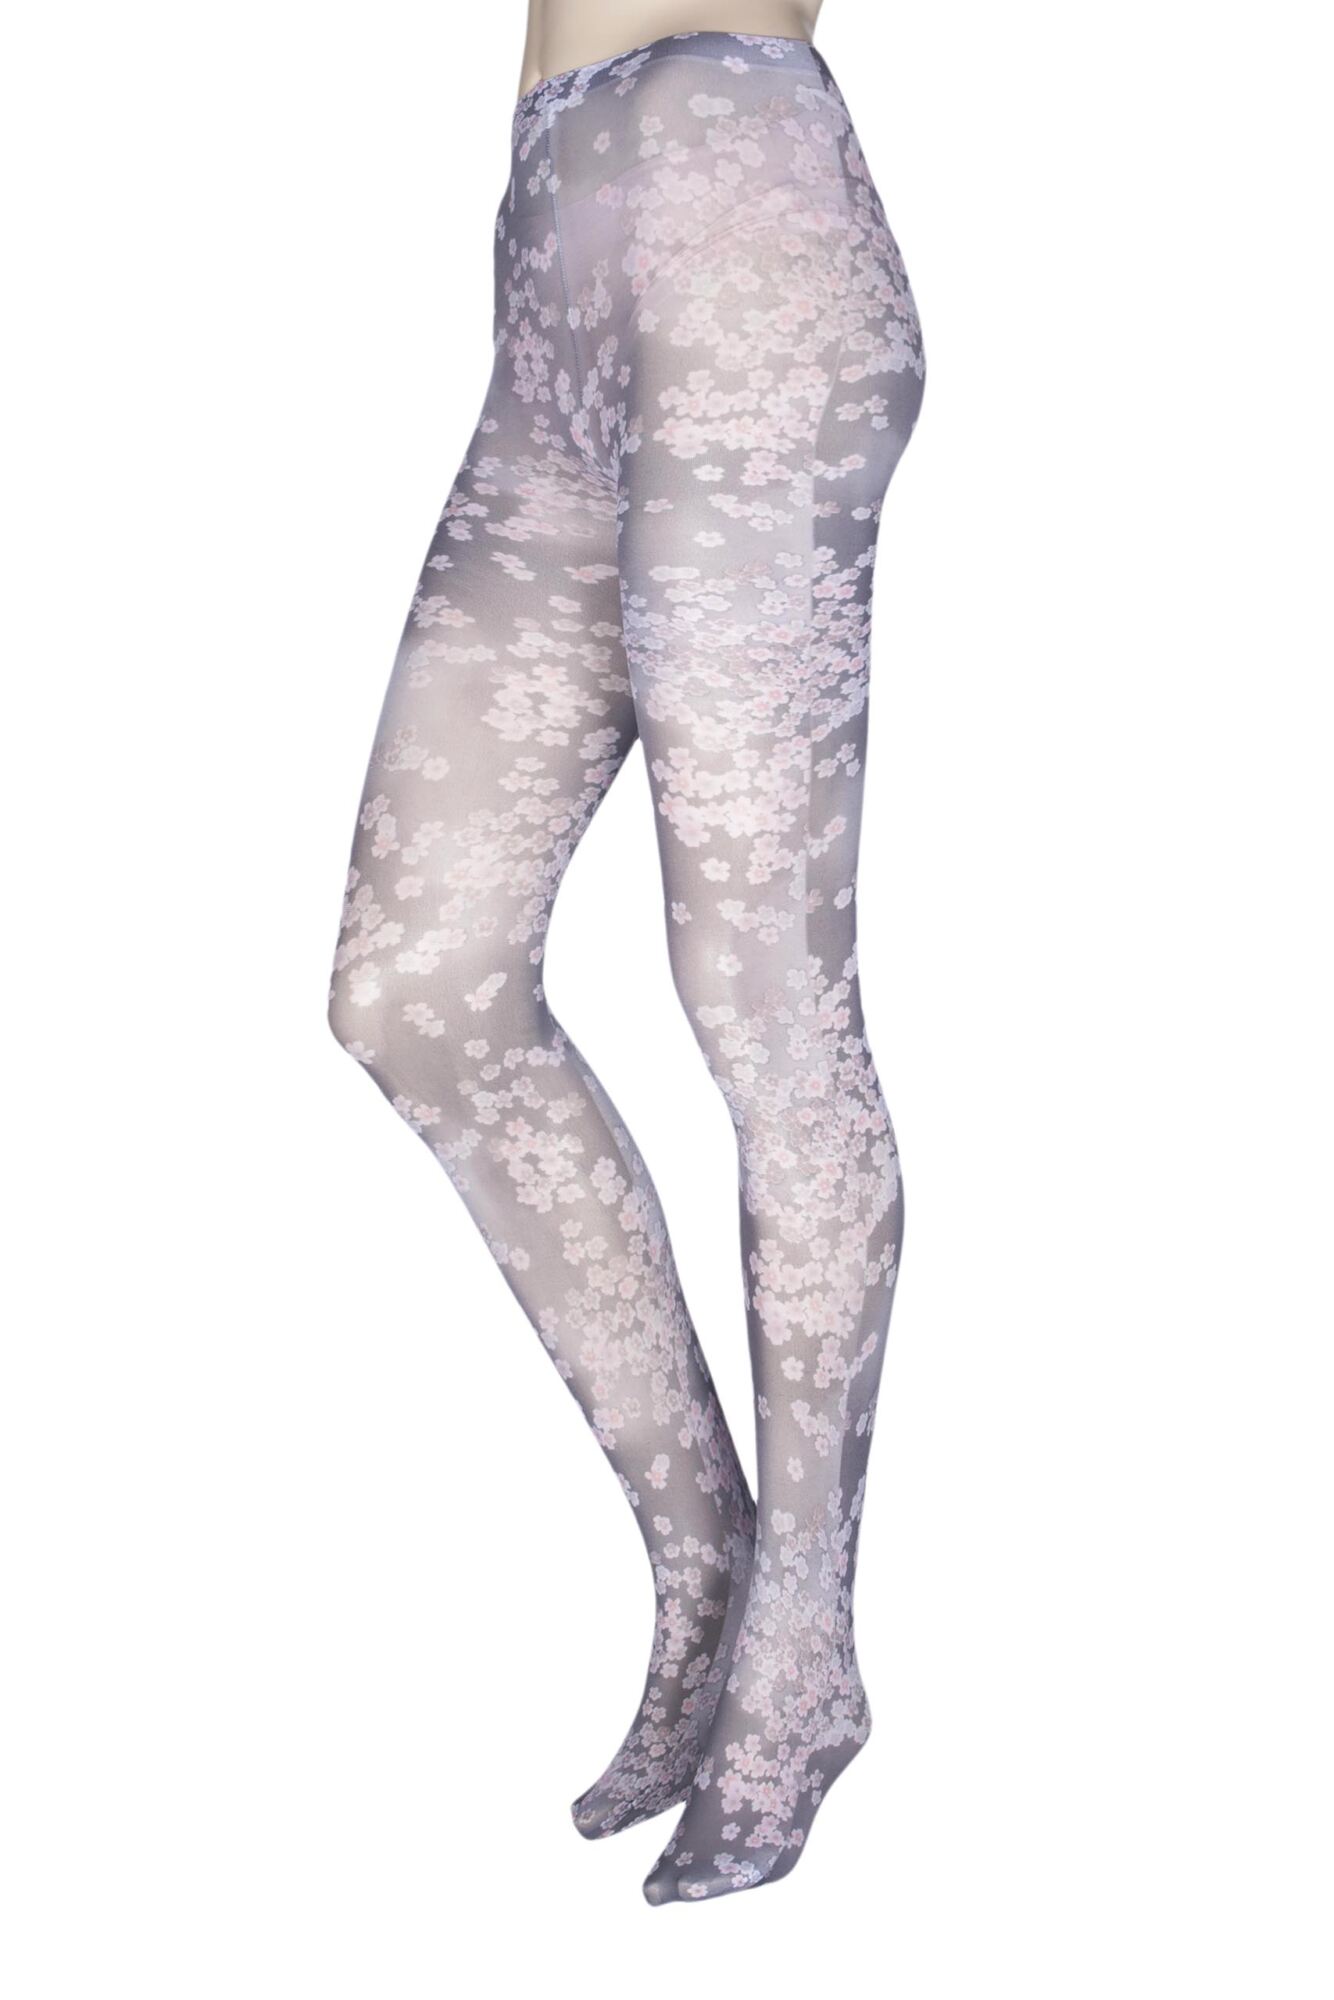 1 Pair Cherry Blossom Patterned Printed Tights Ladies - Elle